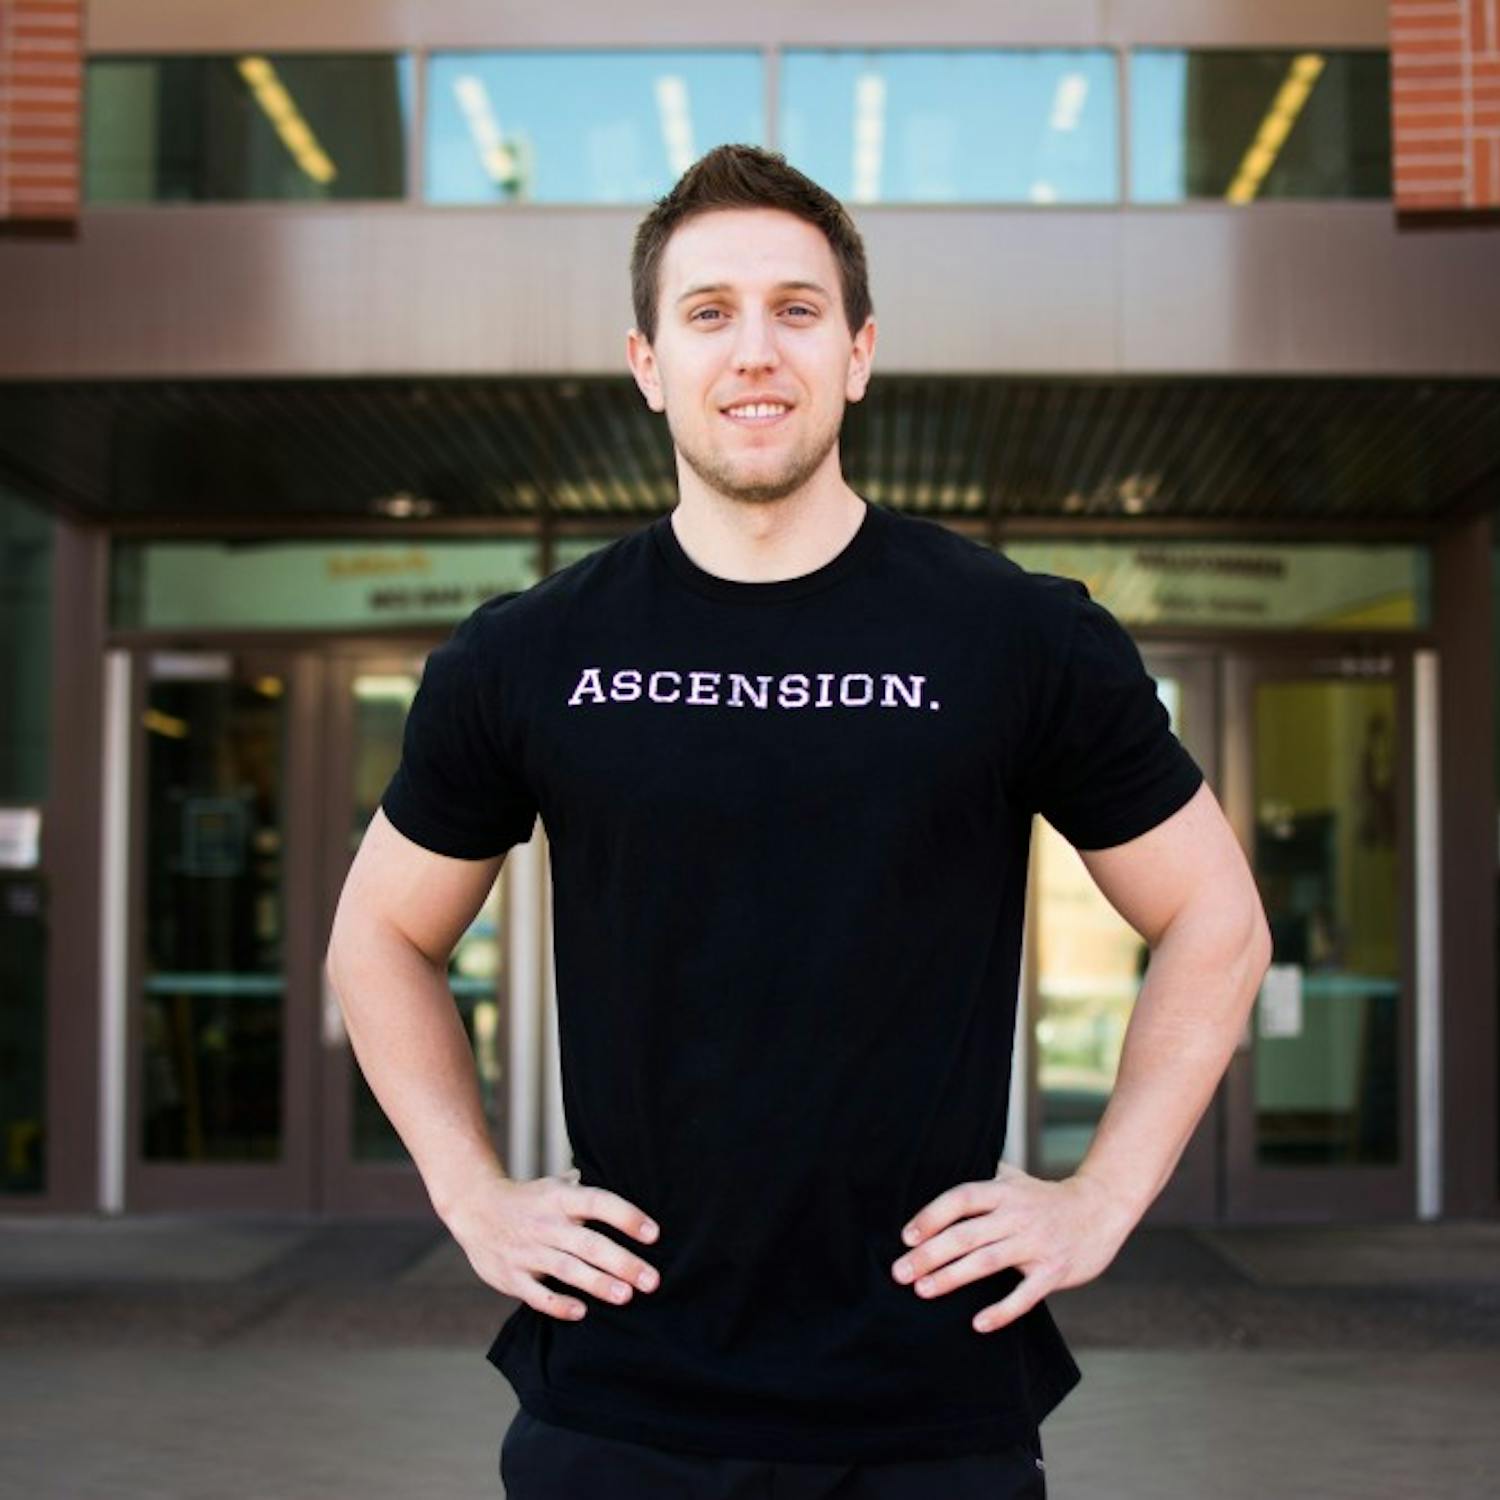 TJ Uli, 21-year-old biochemistry senior at ASU, poses outside of ASU Tempe’s Sun Devil Fitness Complex on Jan. 18, 2017. Uli sports a t-shirt from his recently launched apparel line “Ascension. Athletic Apparel and Lifestyle”. 
